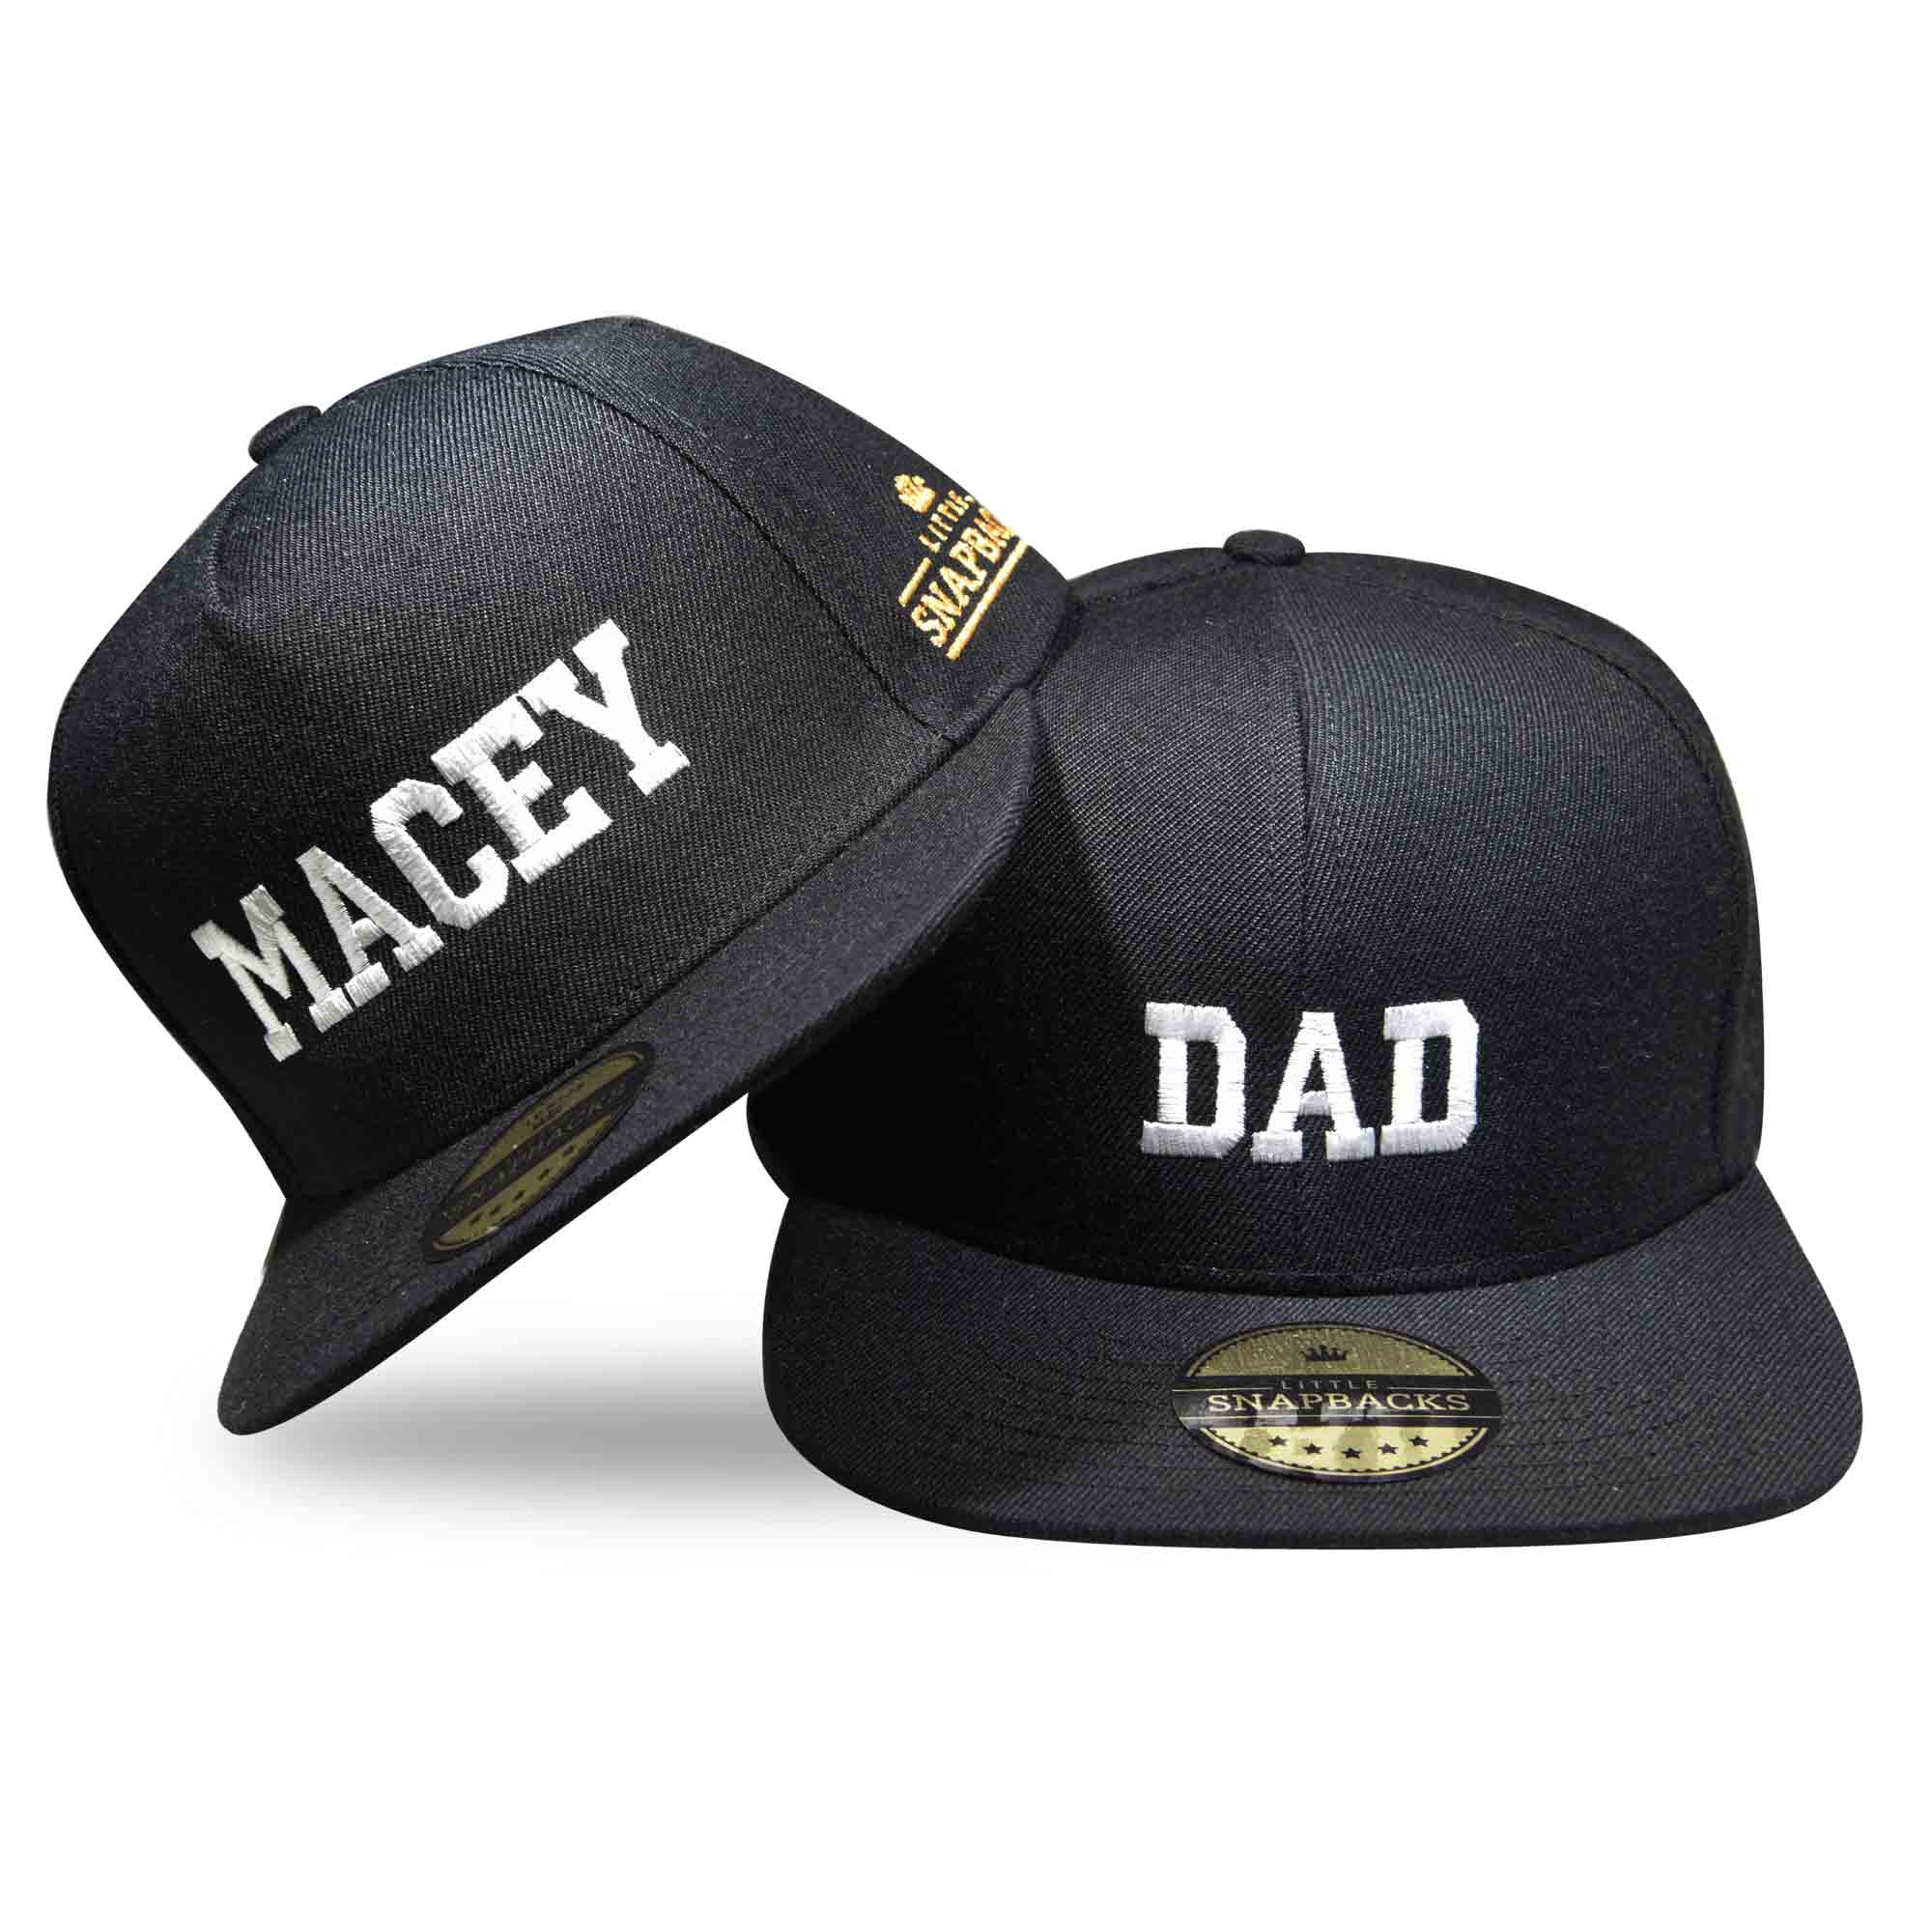 Matching Daddy Daughter Gift Idea